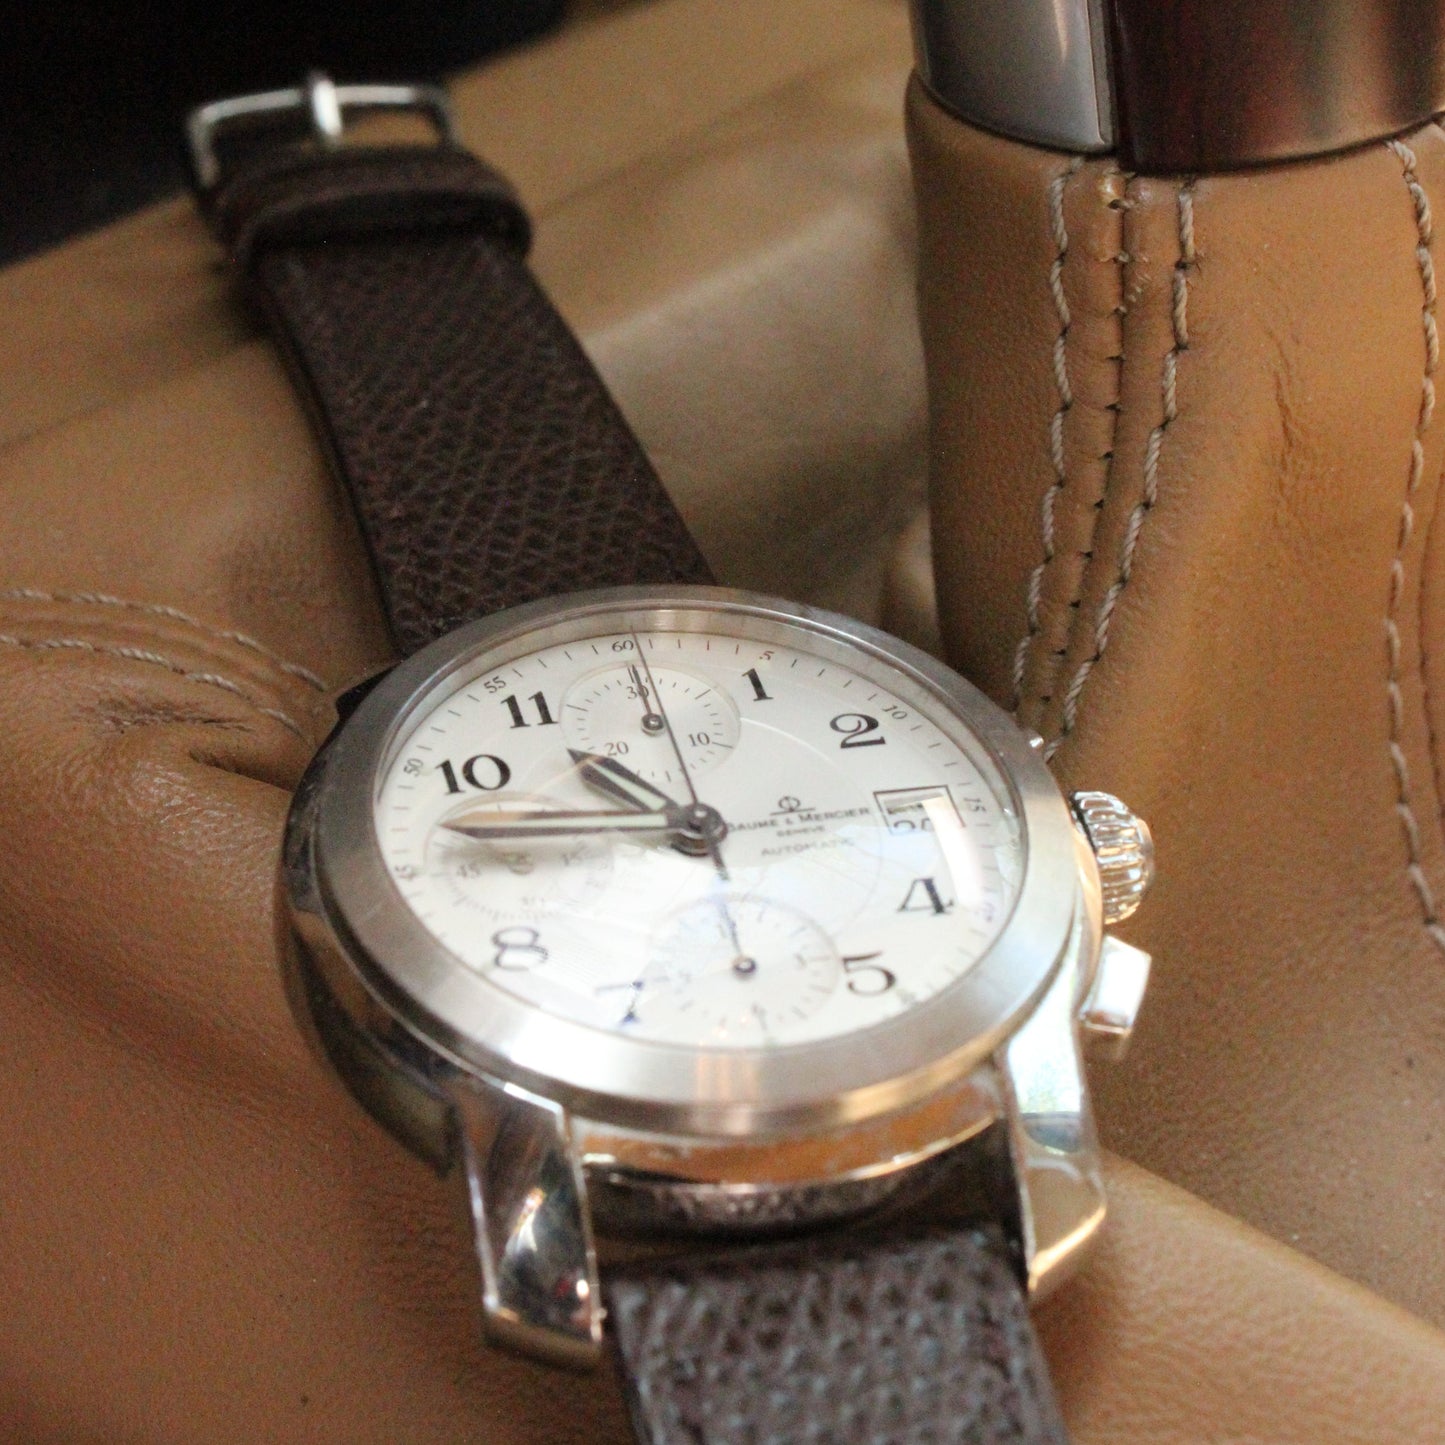 The Conyers Farm Watch Strap in Brown